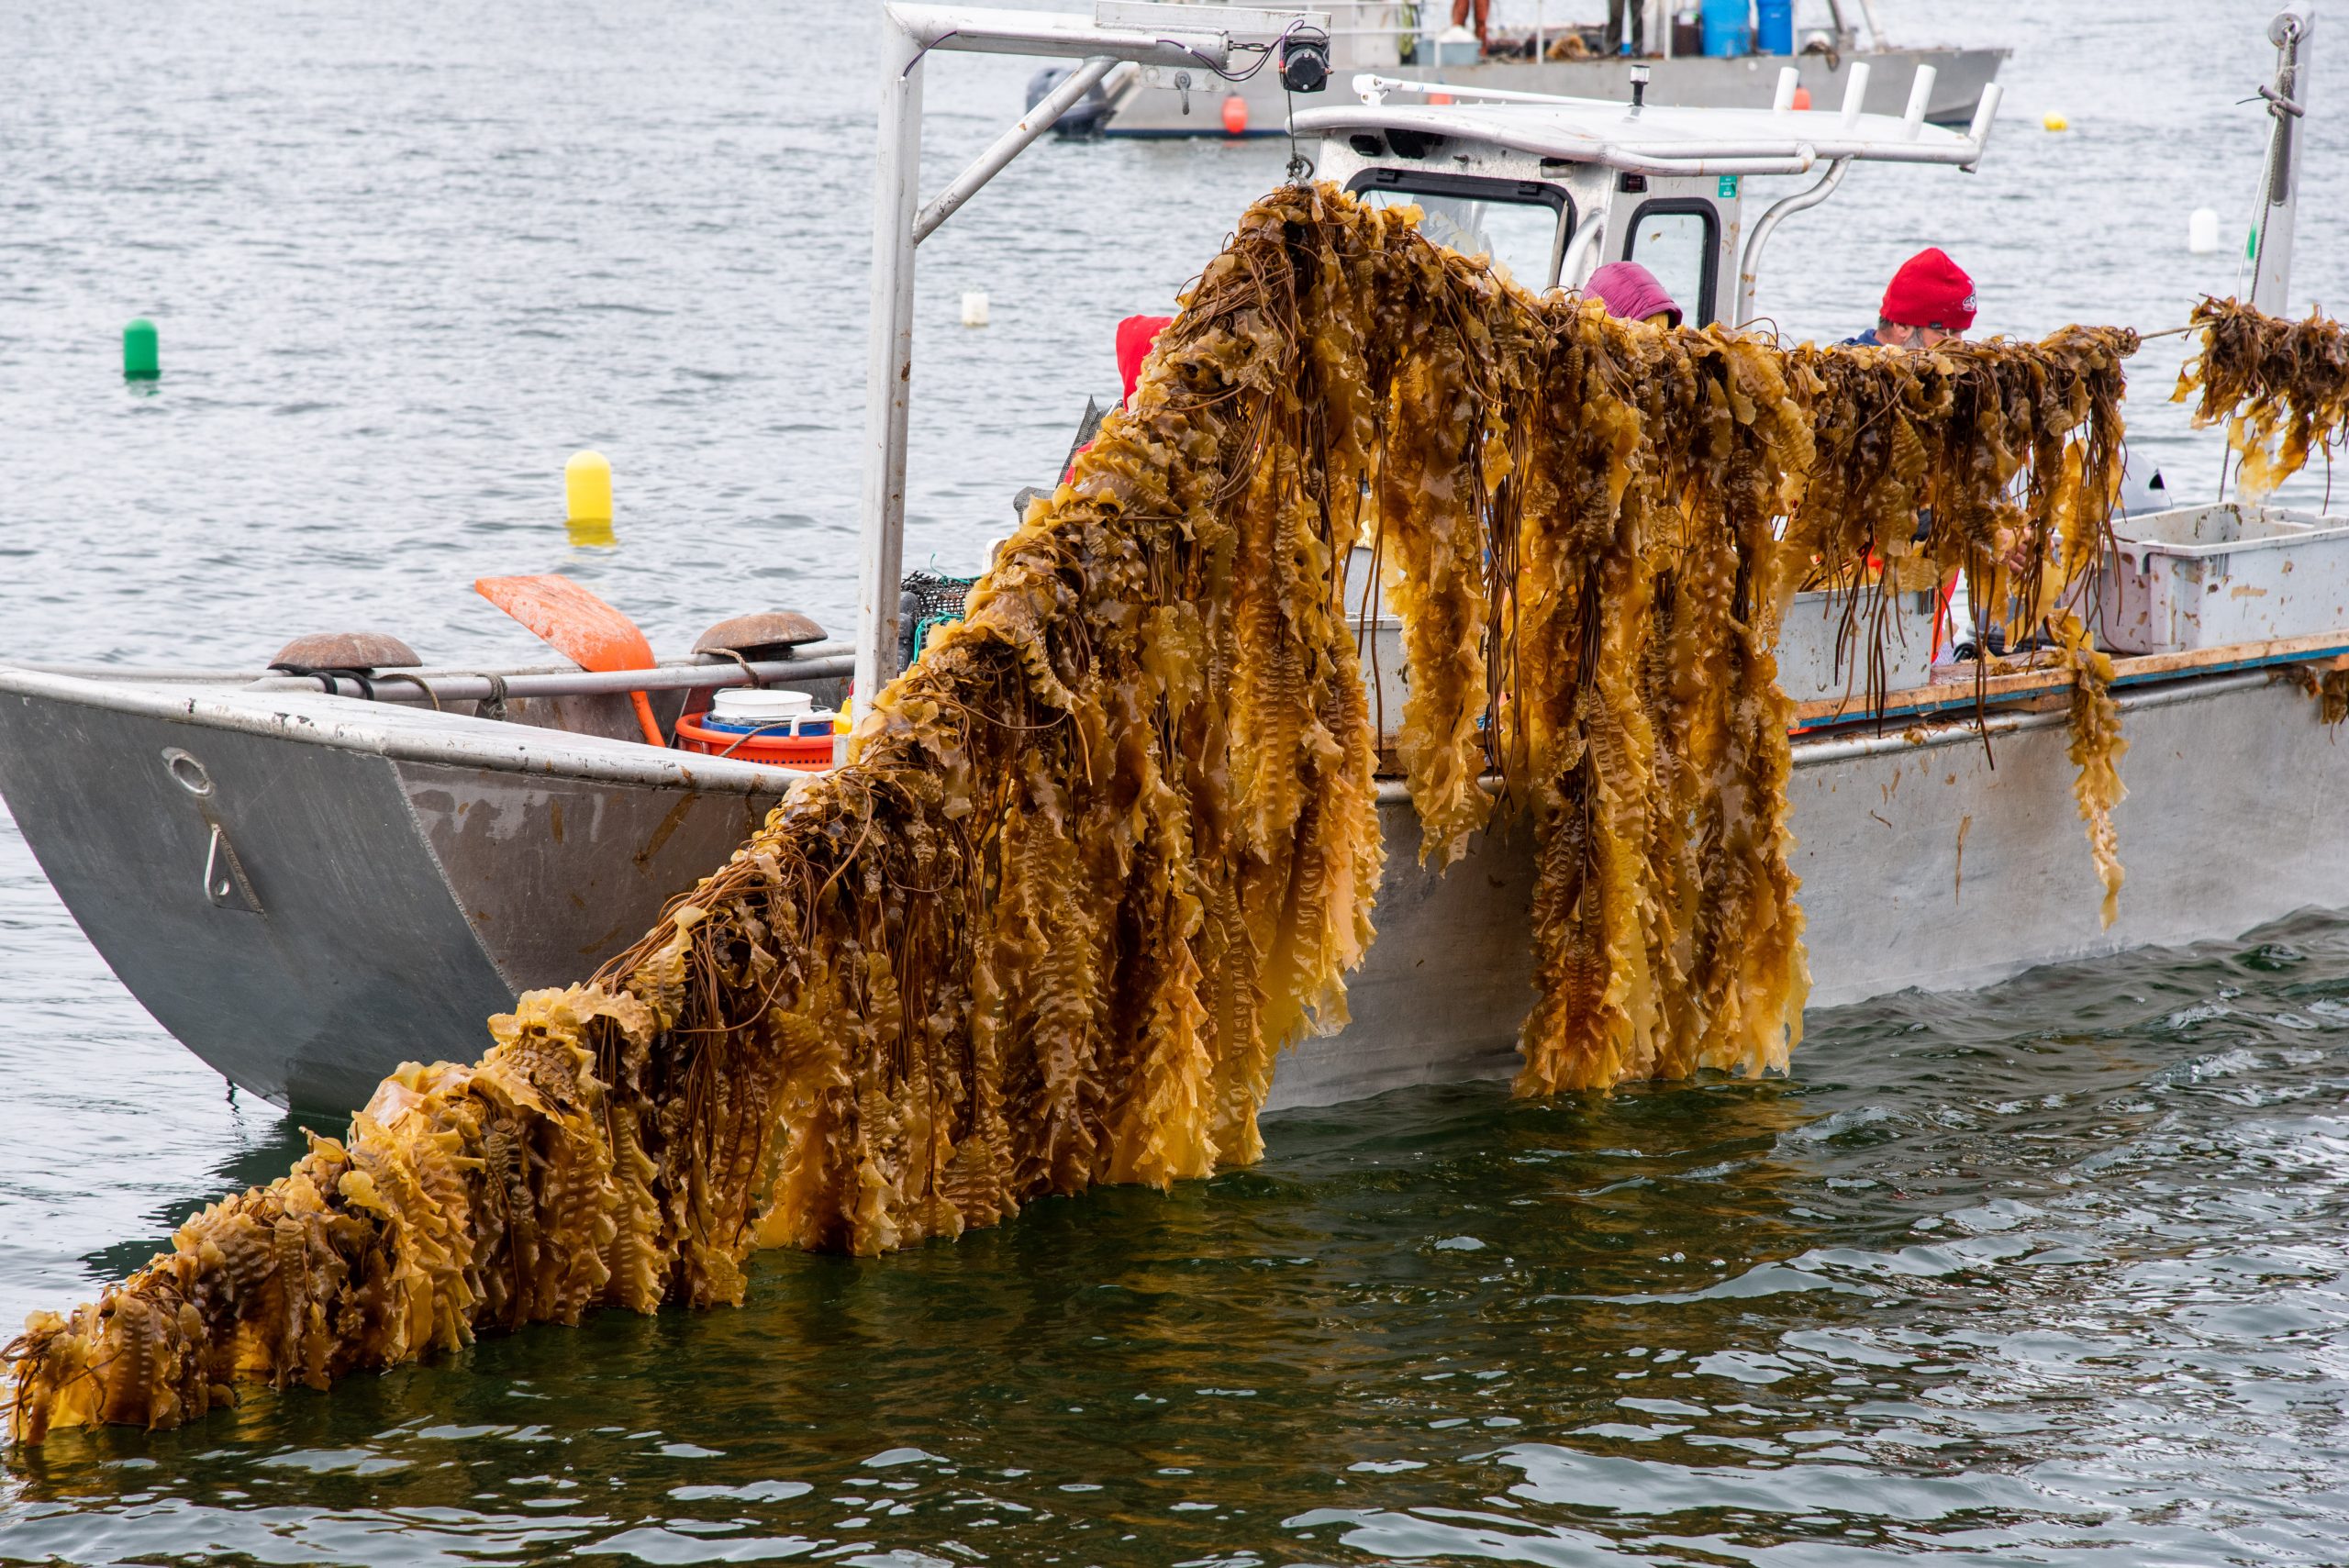 harvesting kelp in a boat on the water